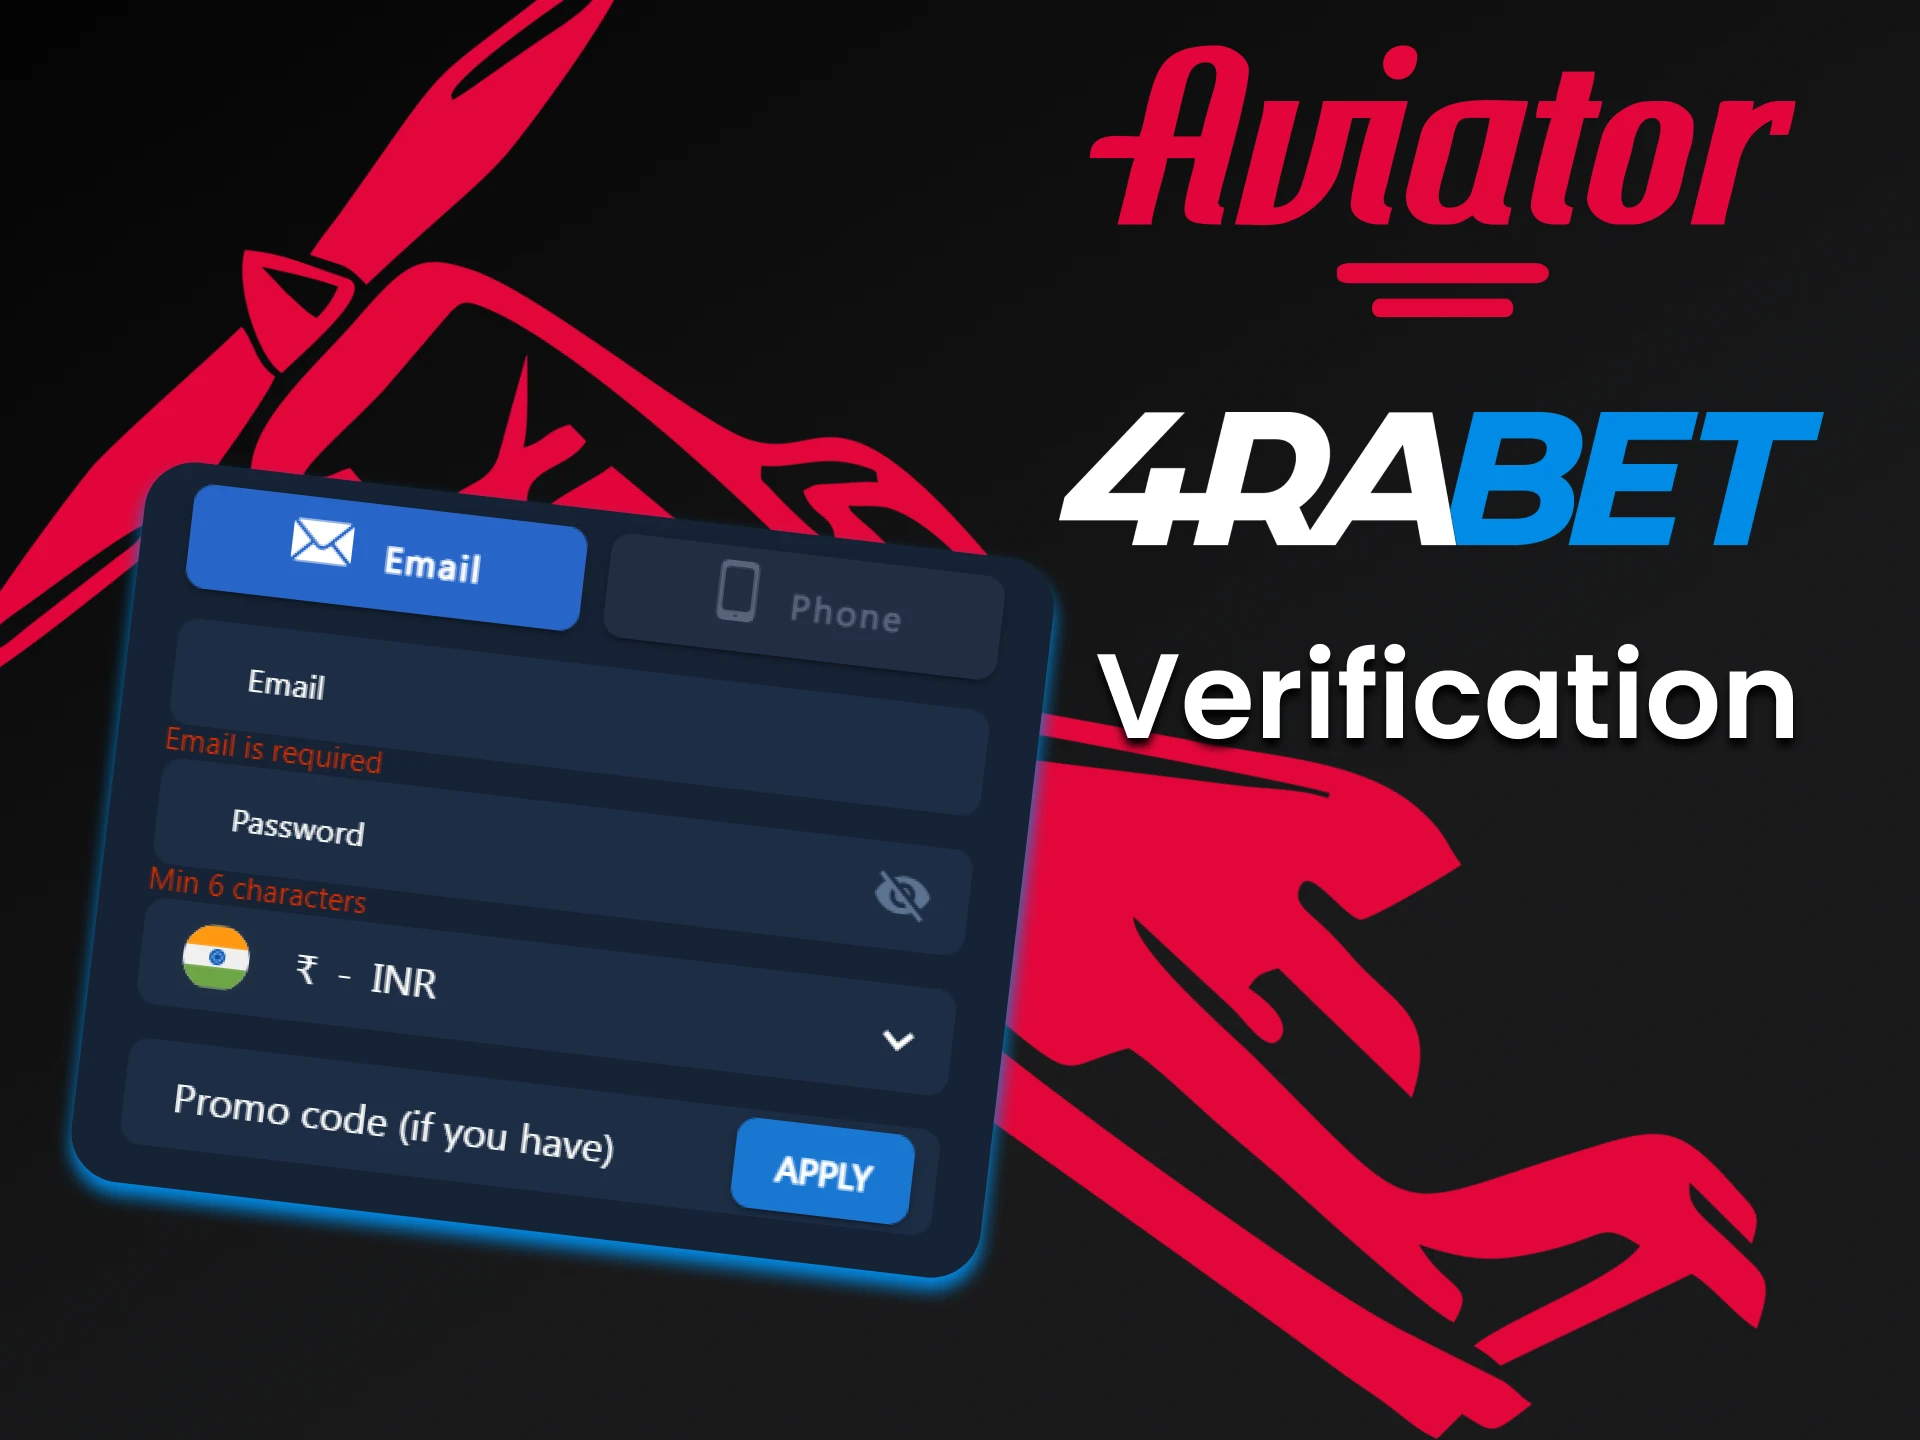 Fill in the required data on 4rabet to play Aviator.